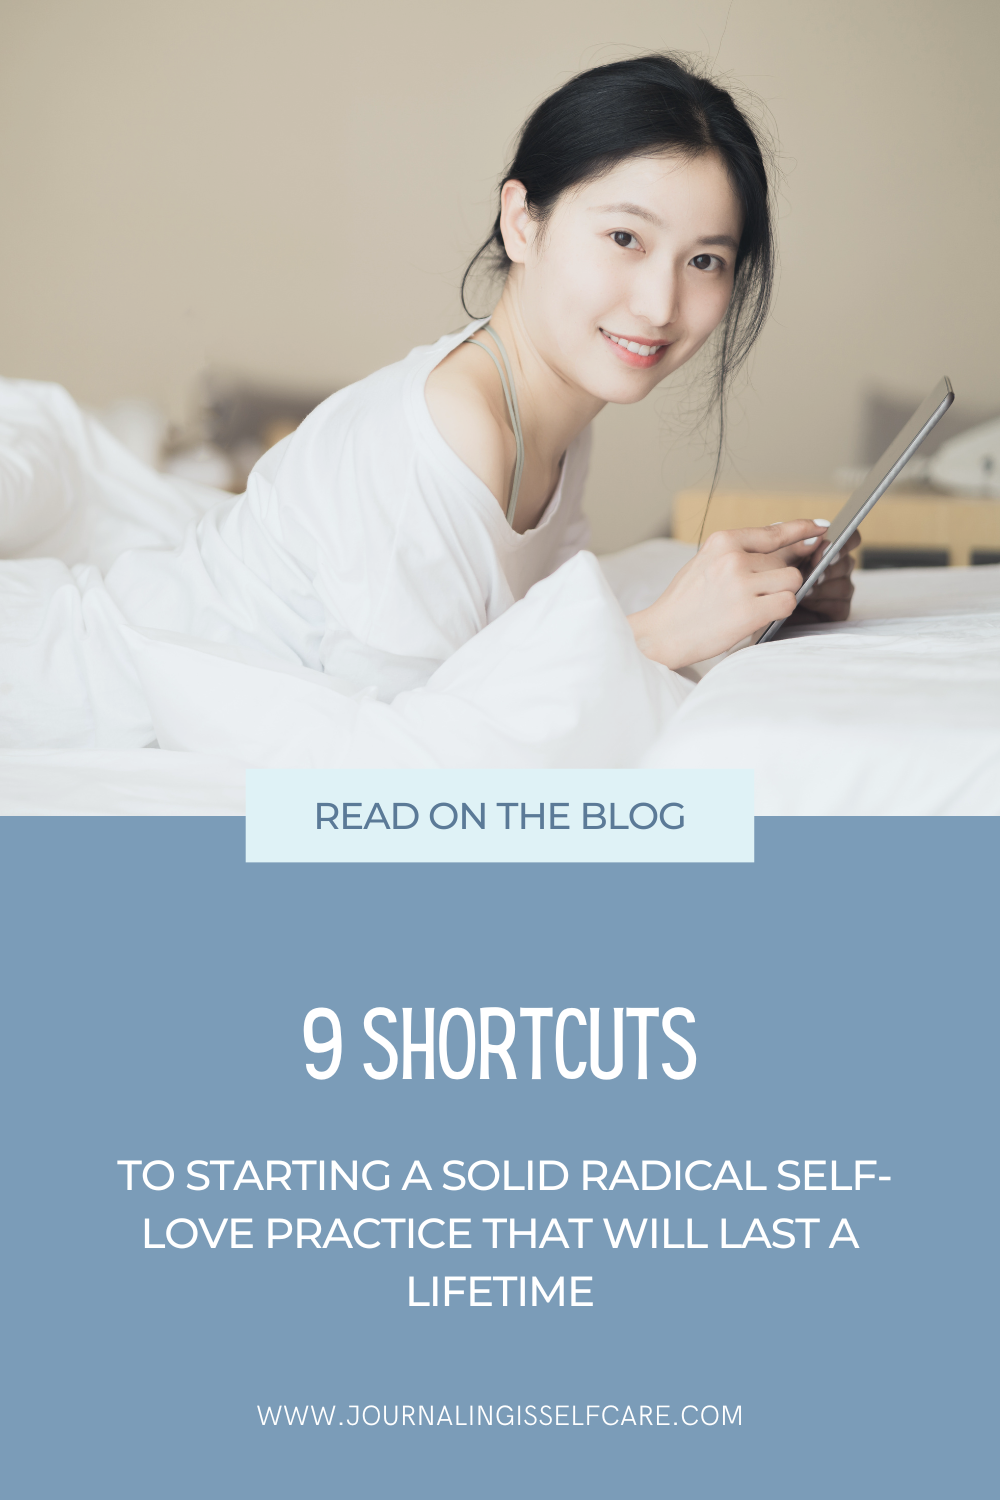 9 Shortcuts to Starting a Solid Radical Self-Love Practice That Will Last a Lifetime